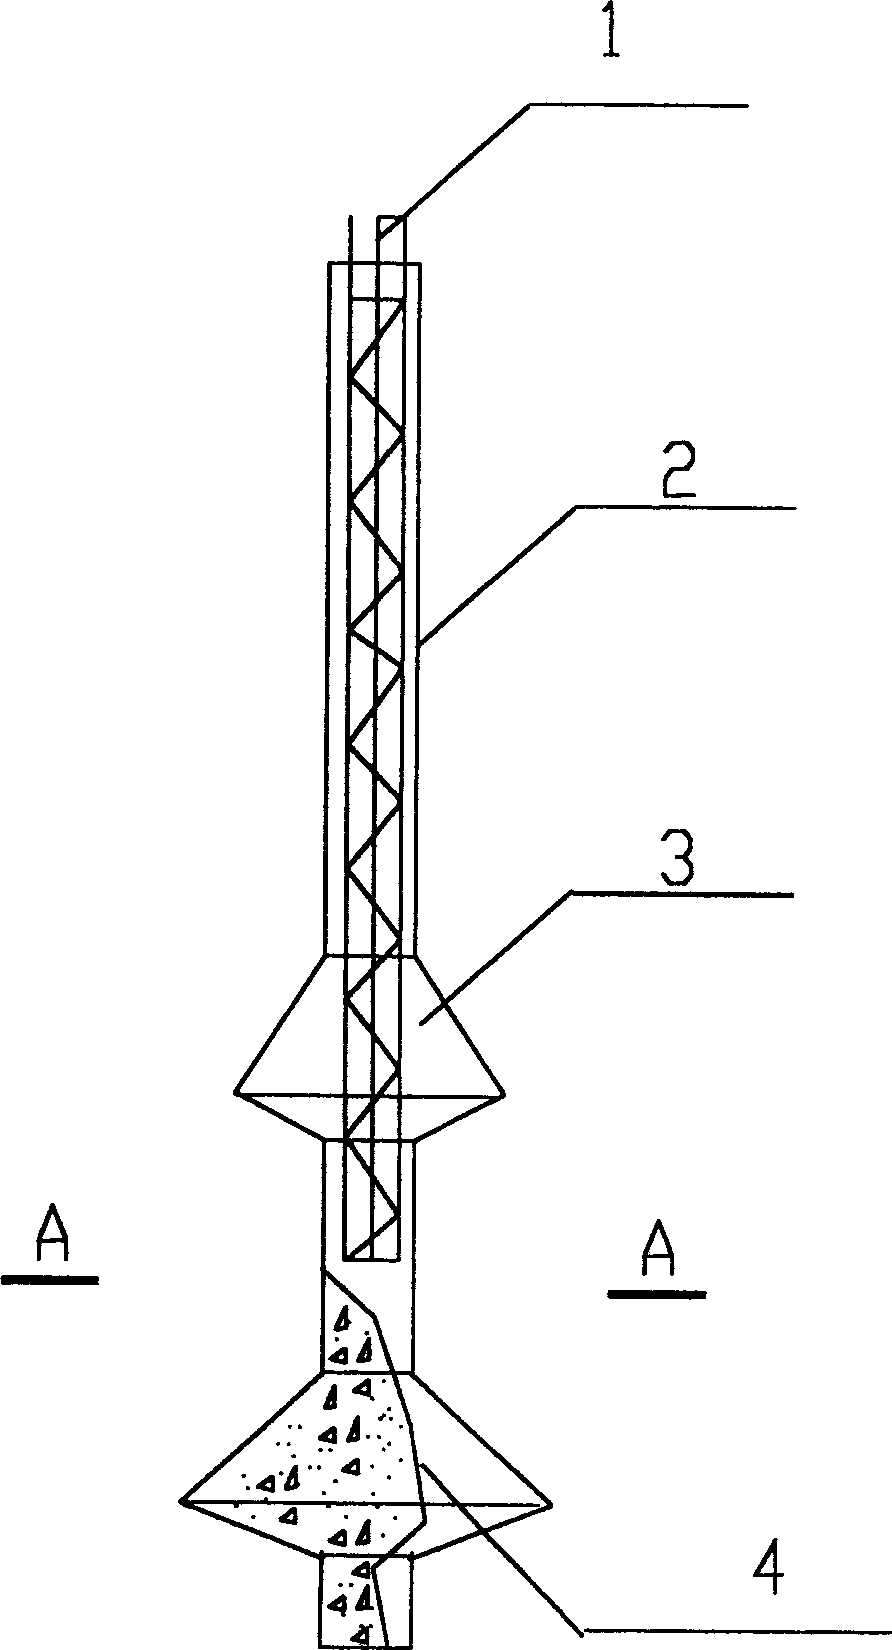 Variable bearing disk club-footed pile forming equipment